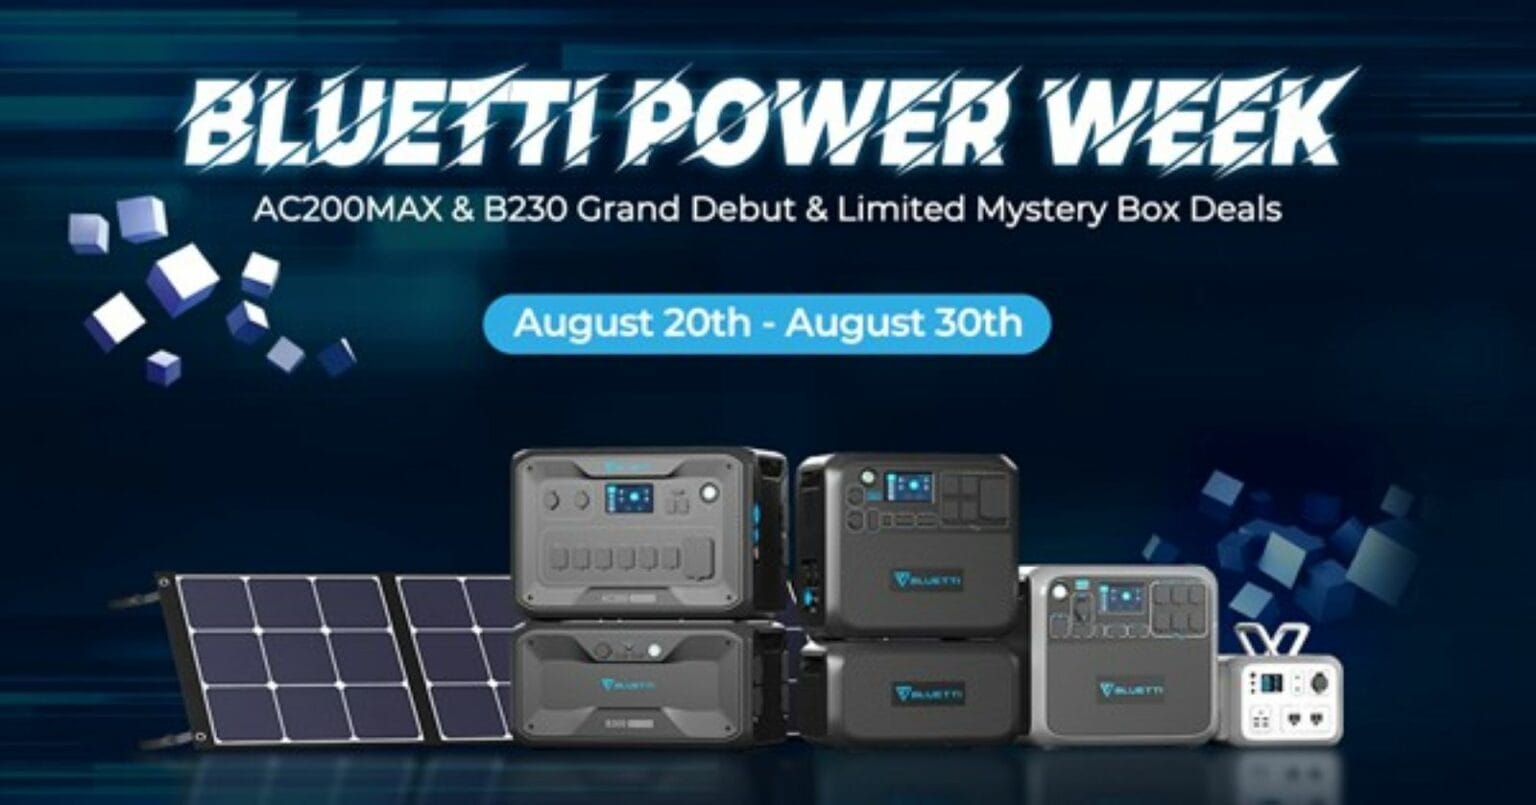 Bluetti Power Week sees the introduction of new products and special deals.